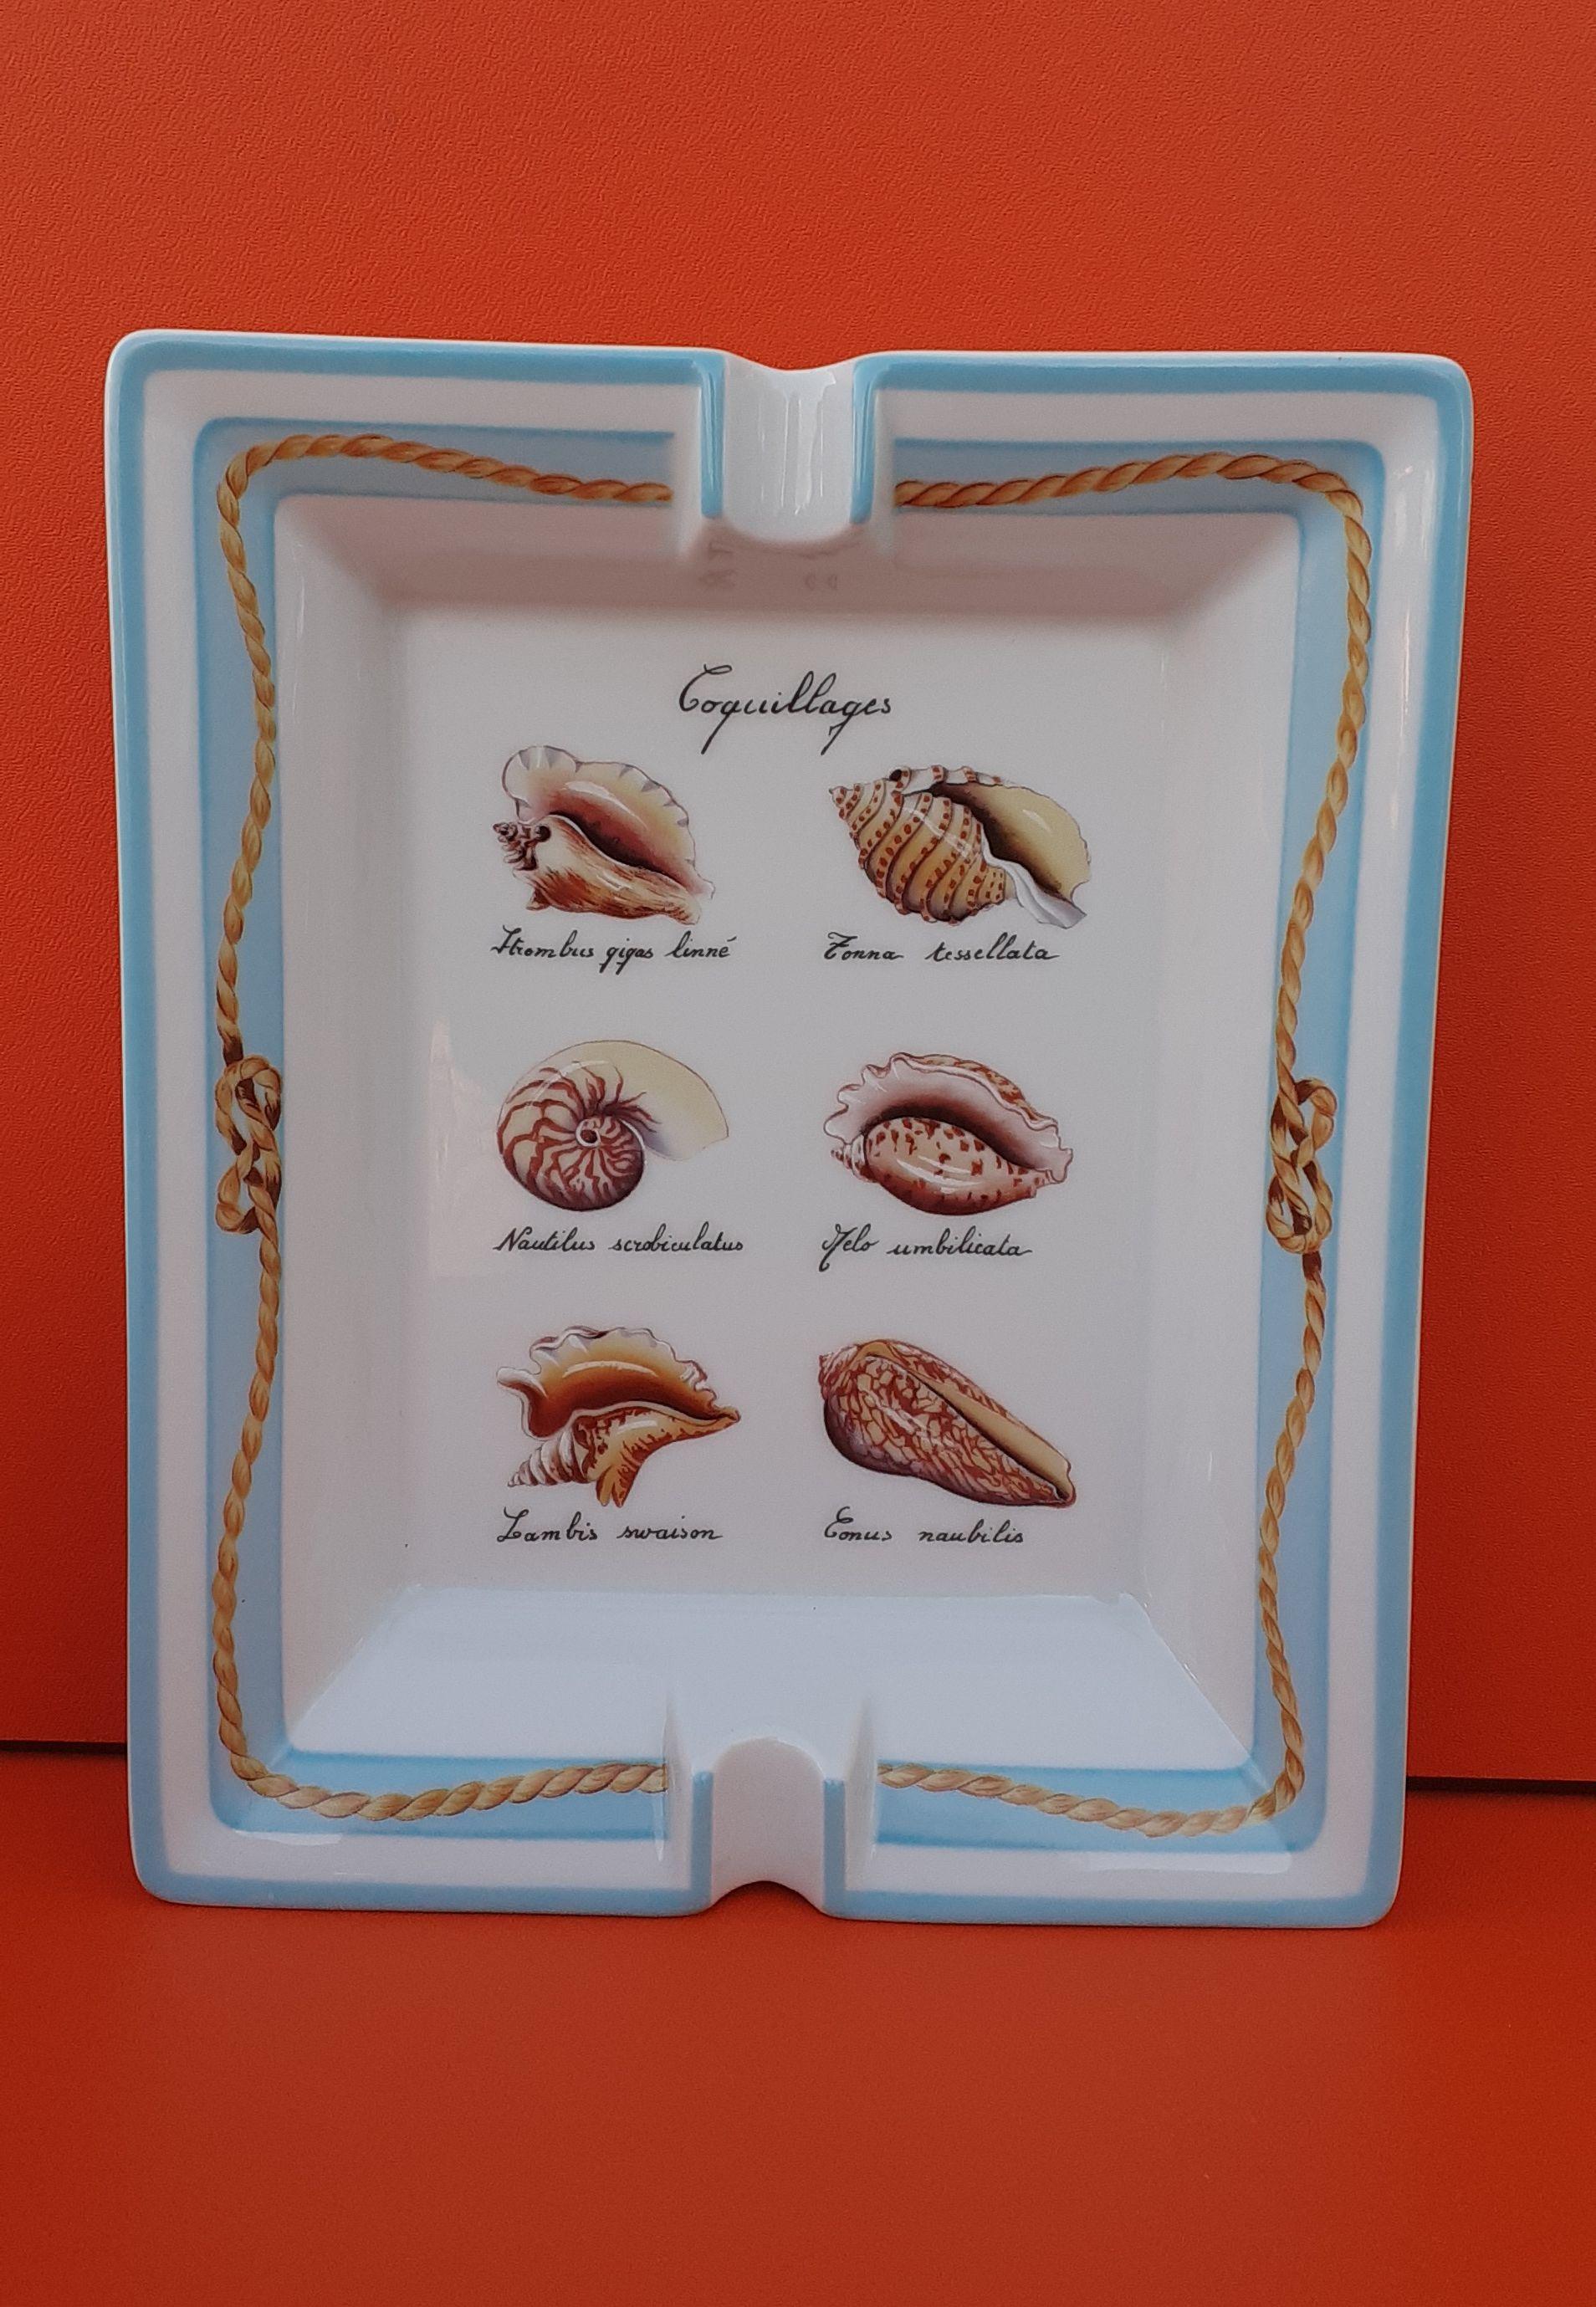 Beautiful Authentic Hermès Ashtray

Print: 6 seashells and their latin name

Made in France

Made of Porcelain

Colorways: Light blue, Yellow, Brown

Beige suede leather at bottom, 